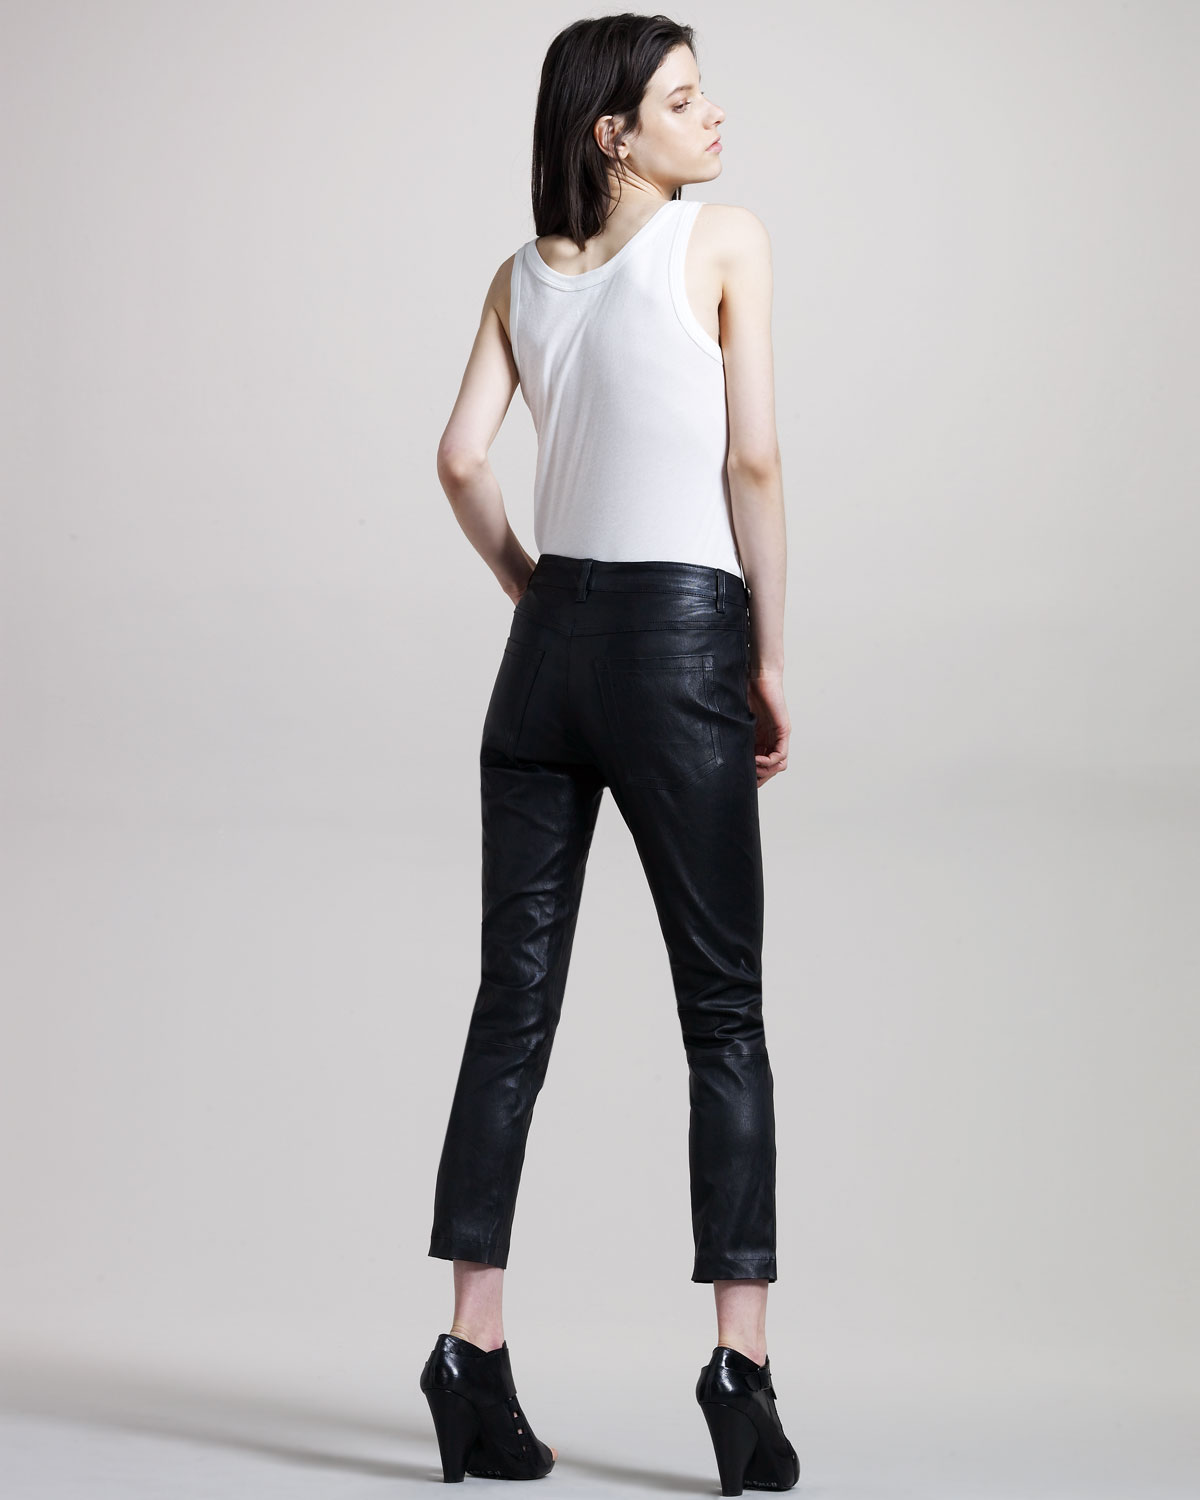 Ann Demeulemeester Leather Pants Deals - tundraecology.hi.is 1694319034